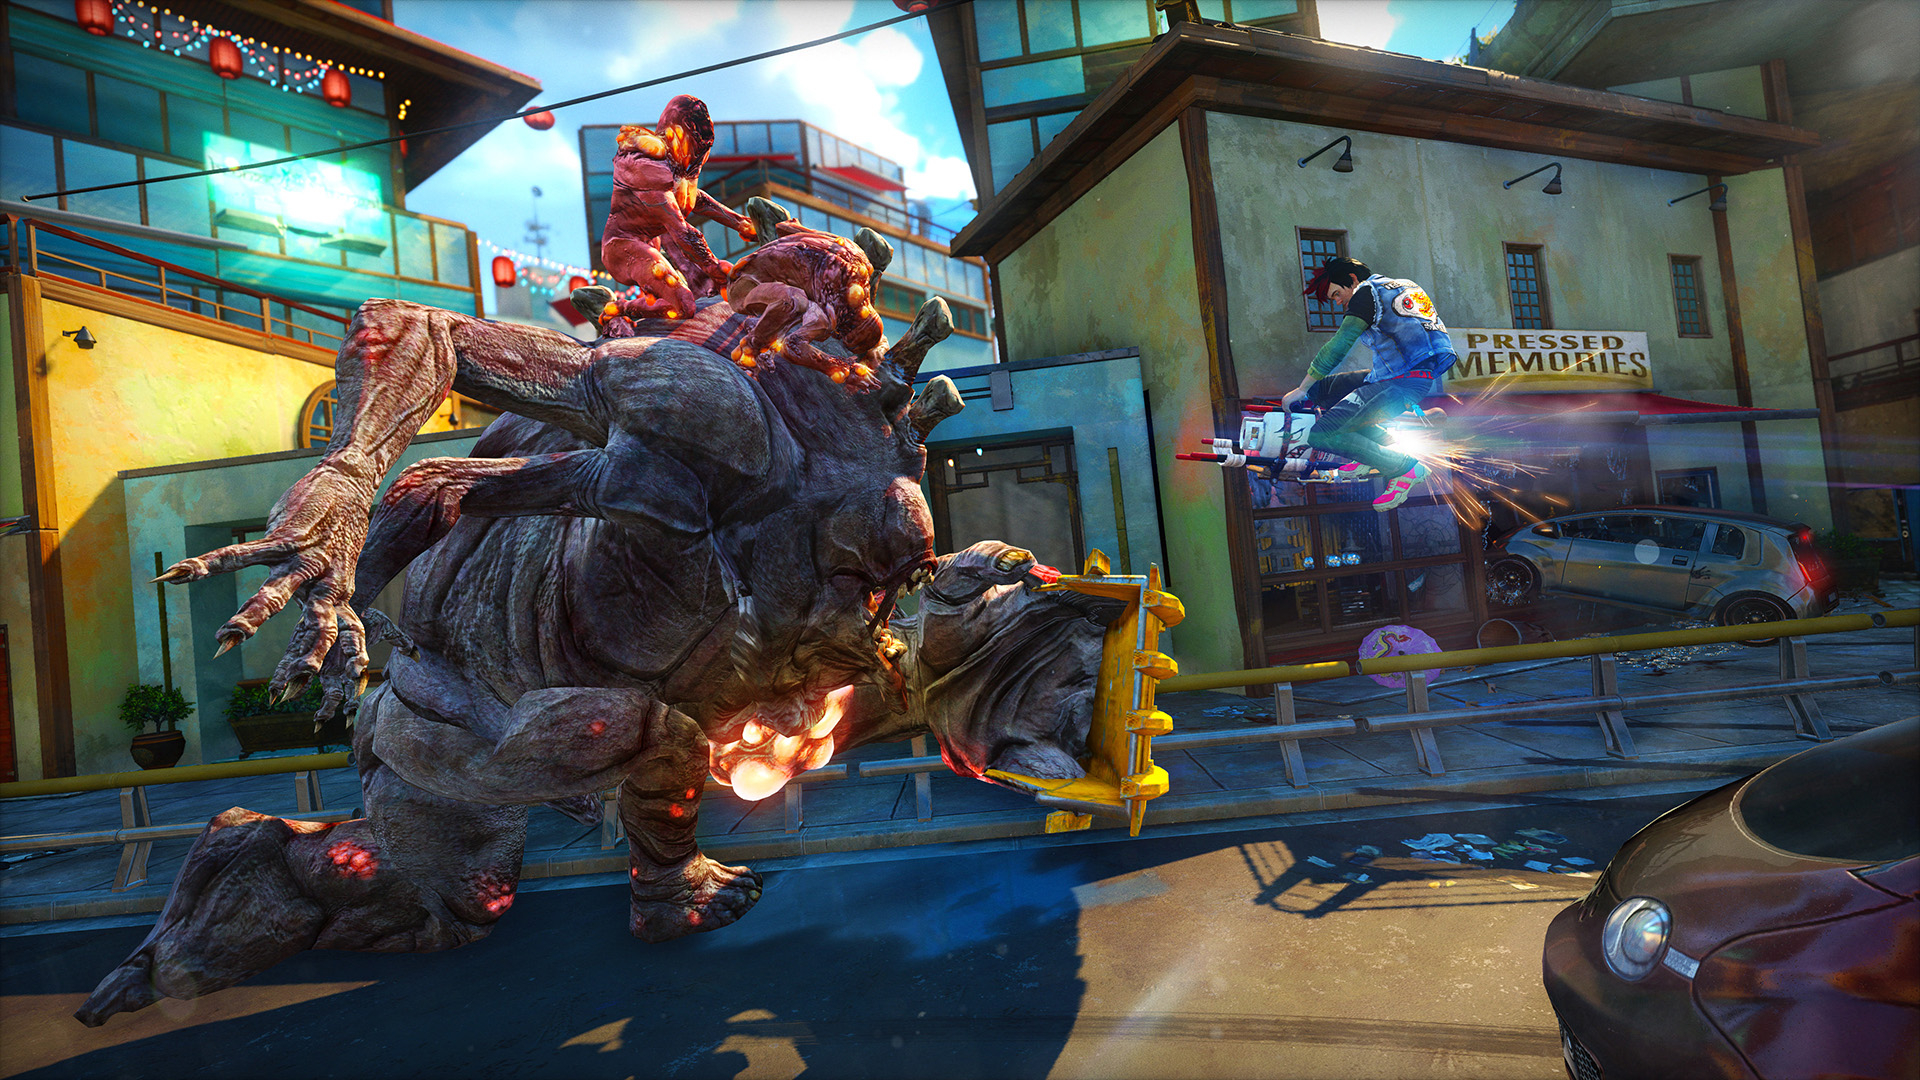 Sunset Overdrive's gameplay debut promises Insomniac brand insanity, soda  mutants and parkour - Neoseeker